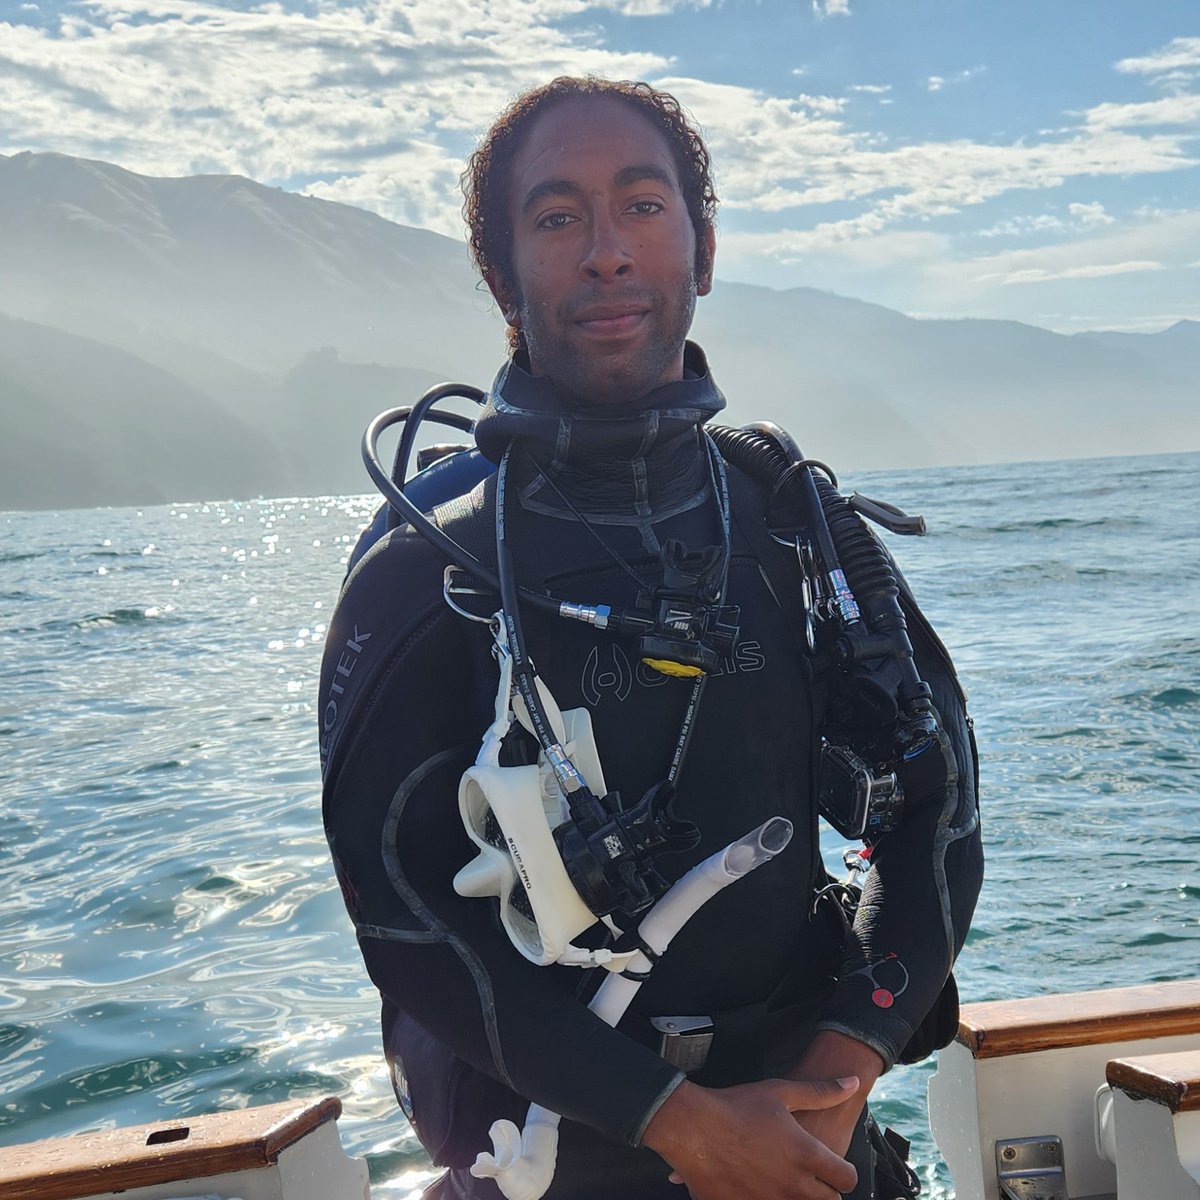 We are pleased to welcome Maxwell Seale as a Coastal Science and Policy PhD designated emphasis student! He will take CSP core courses and dedicate a chapter of his dissertation to a topic that intersects science and policy. Maxwell is a PhD Student in the Dept of Ocean Sciences